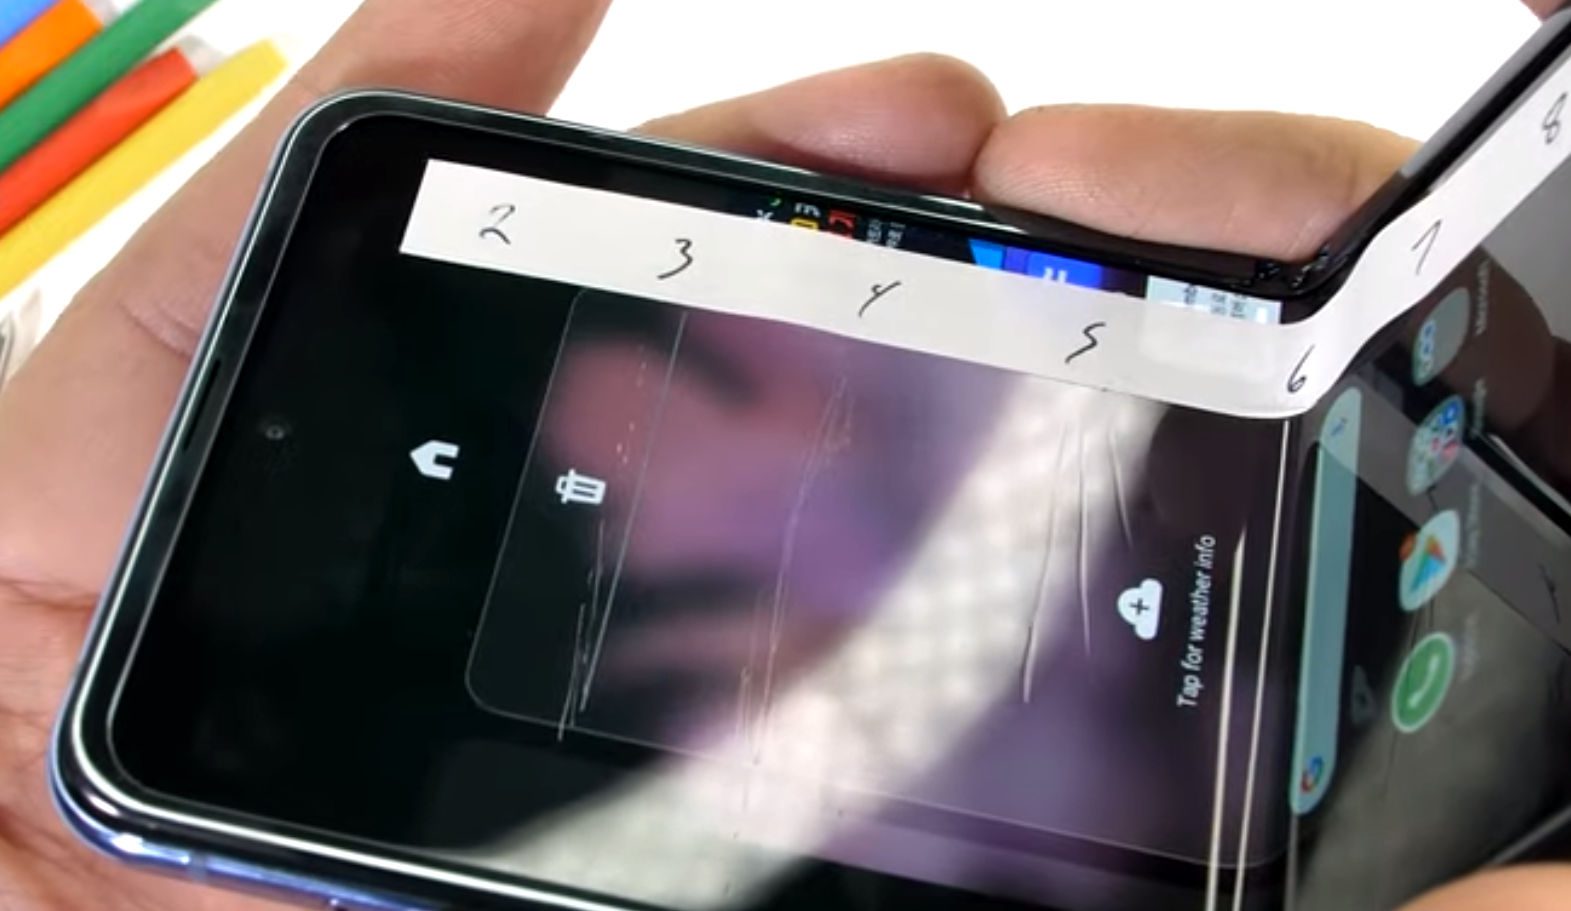 JerryRigEverything says the Samsung Galaxy Z Flip uses Fake Glass